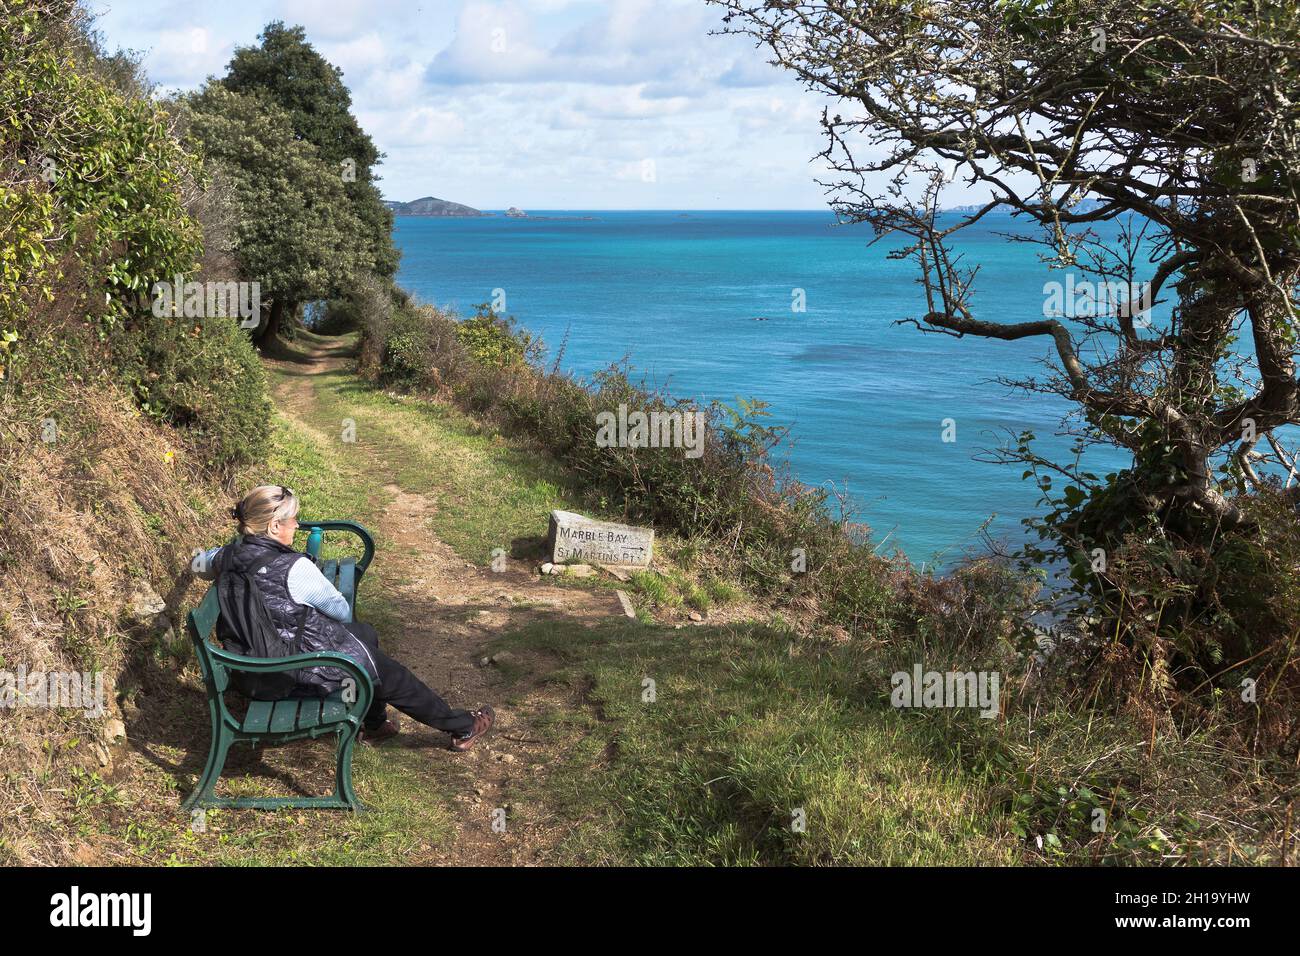 dh Footpath ST MARTIN GUERNSEY Woman sitting on Saint Martins cliff path bench people Stock Photo